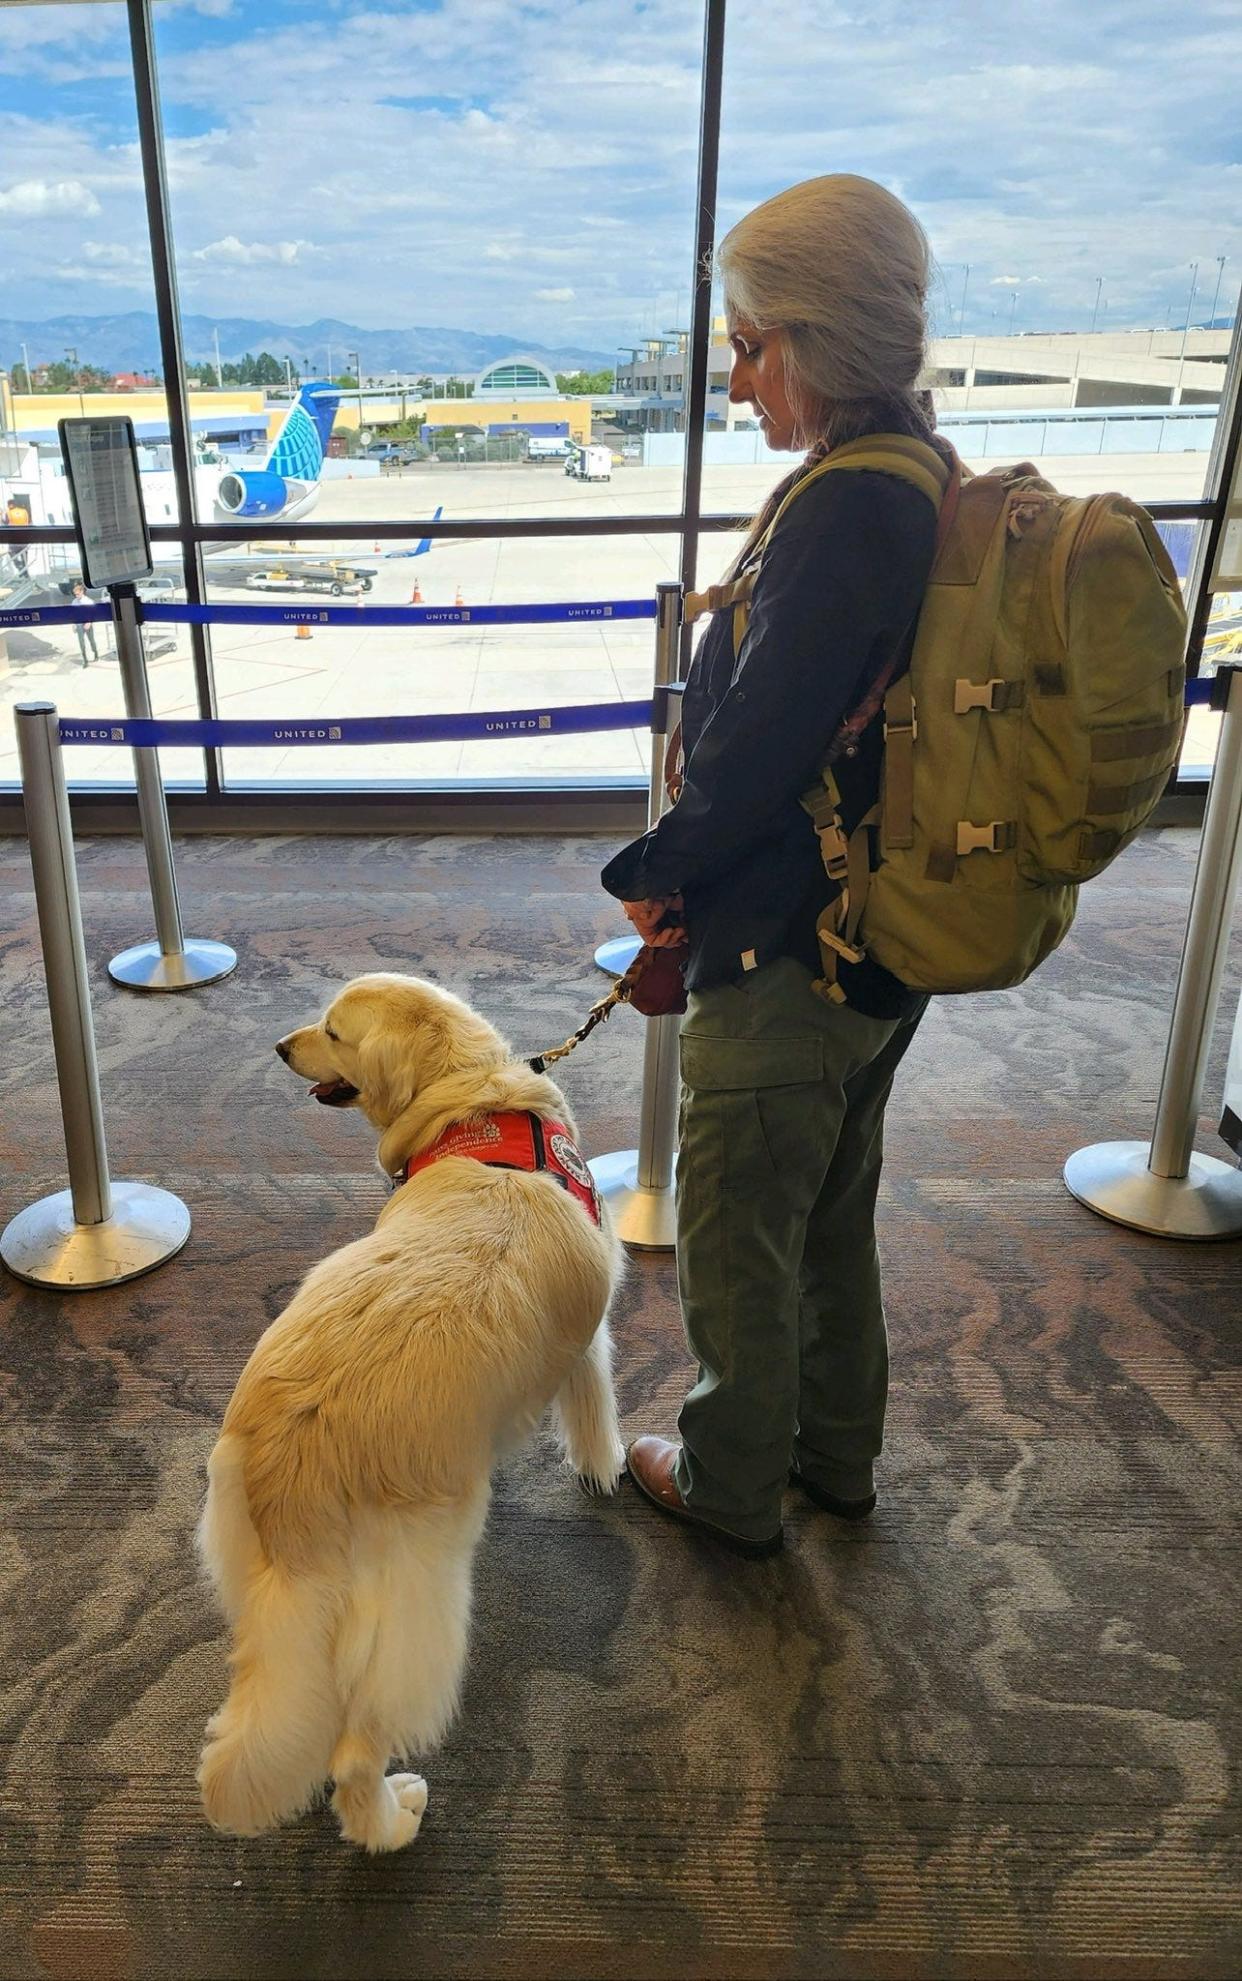 Joey Ramp-Adams and her service dog Sampson at an airport.